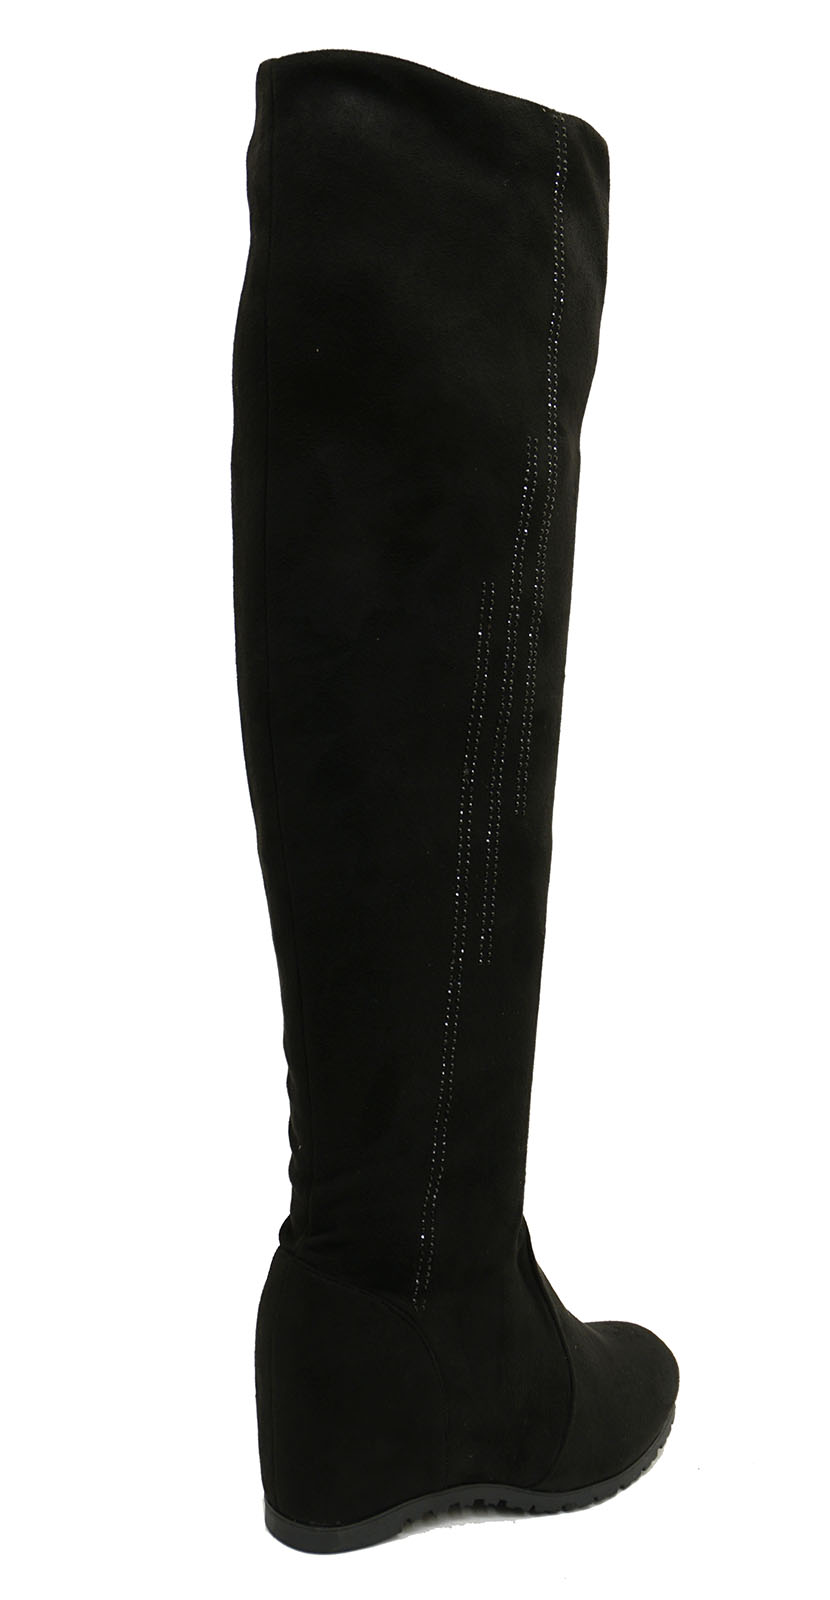 KNEE HIGH RUCHED WEDGE BOOTS SHOES UK 